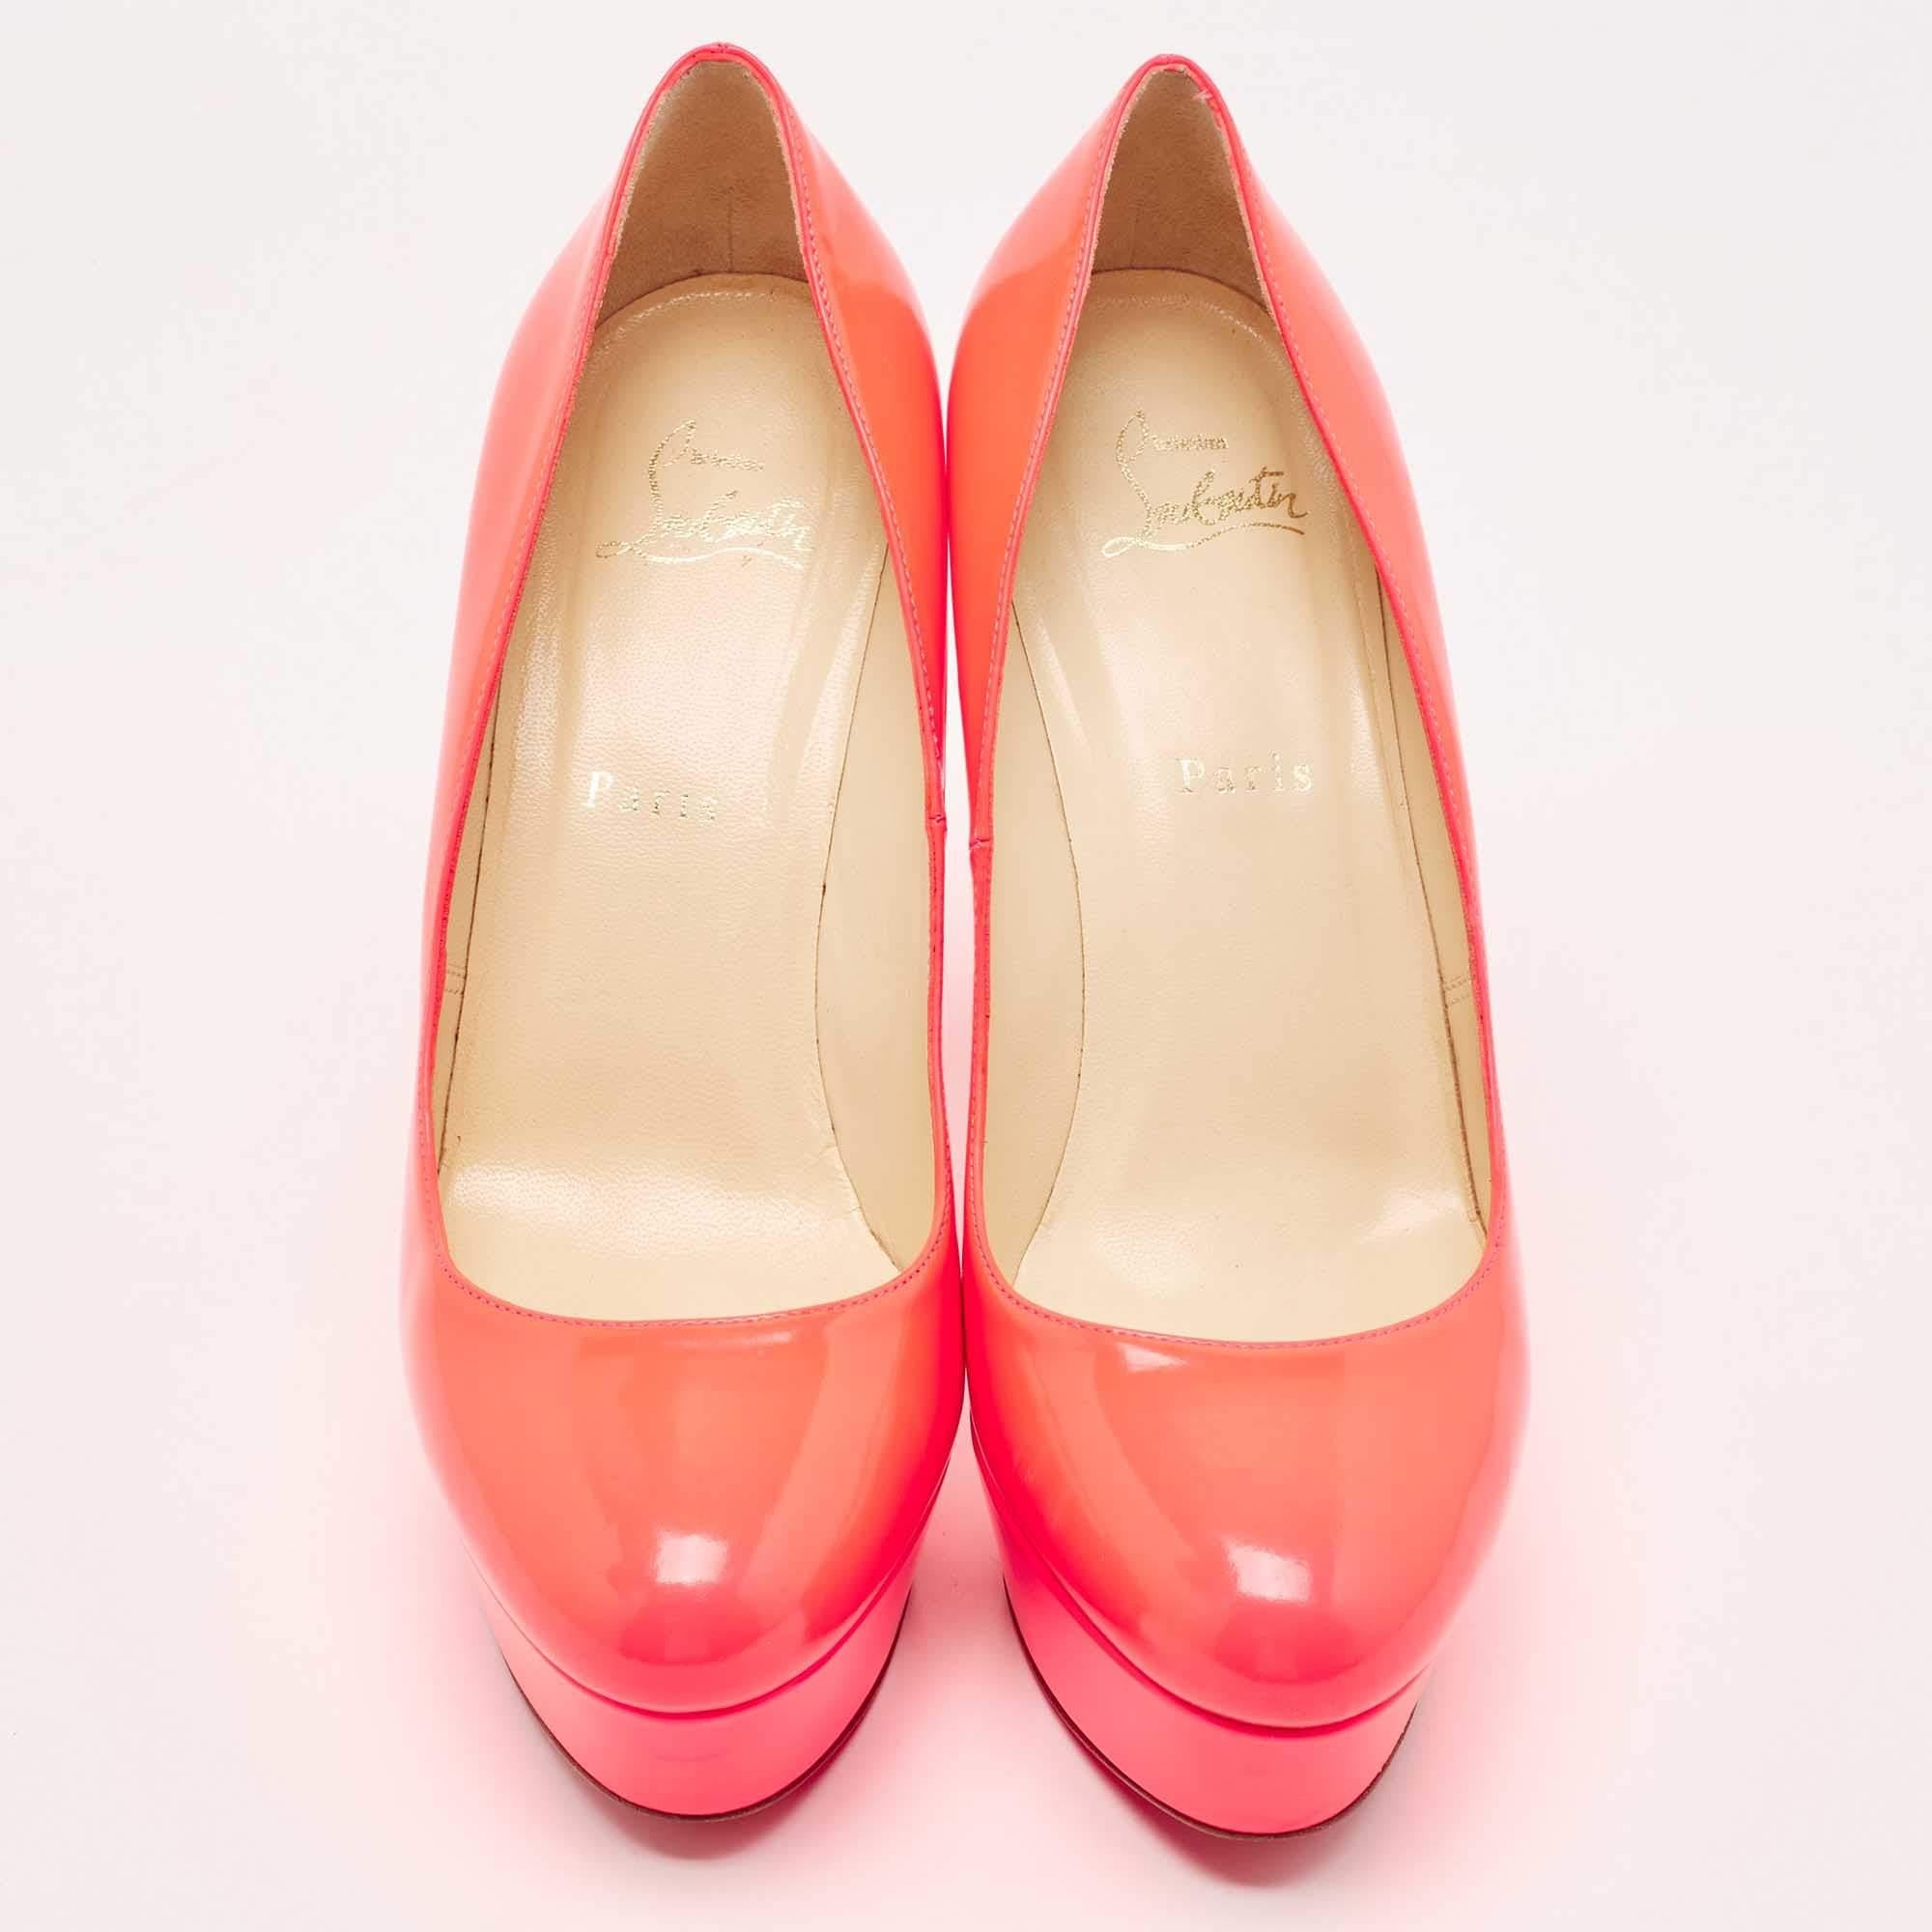 Women's Christian Louboutin Neon Pink Leather Bianca Pumps Size 39.5 For Sale